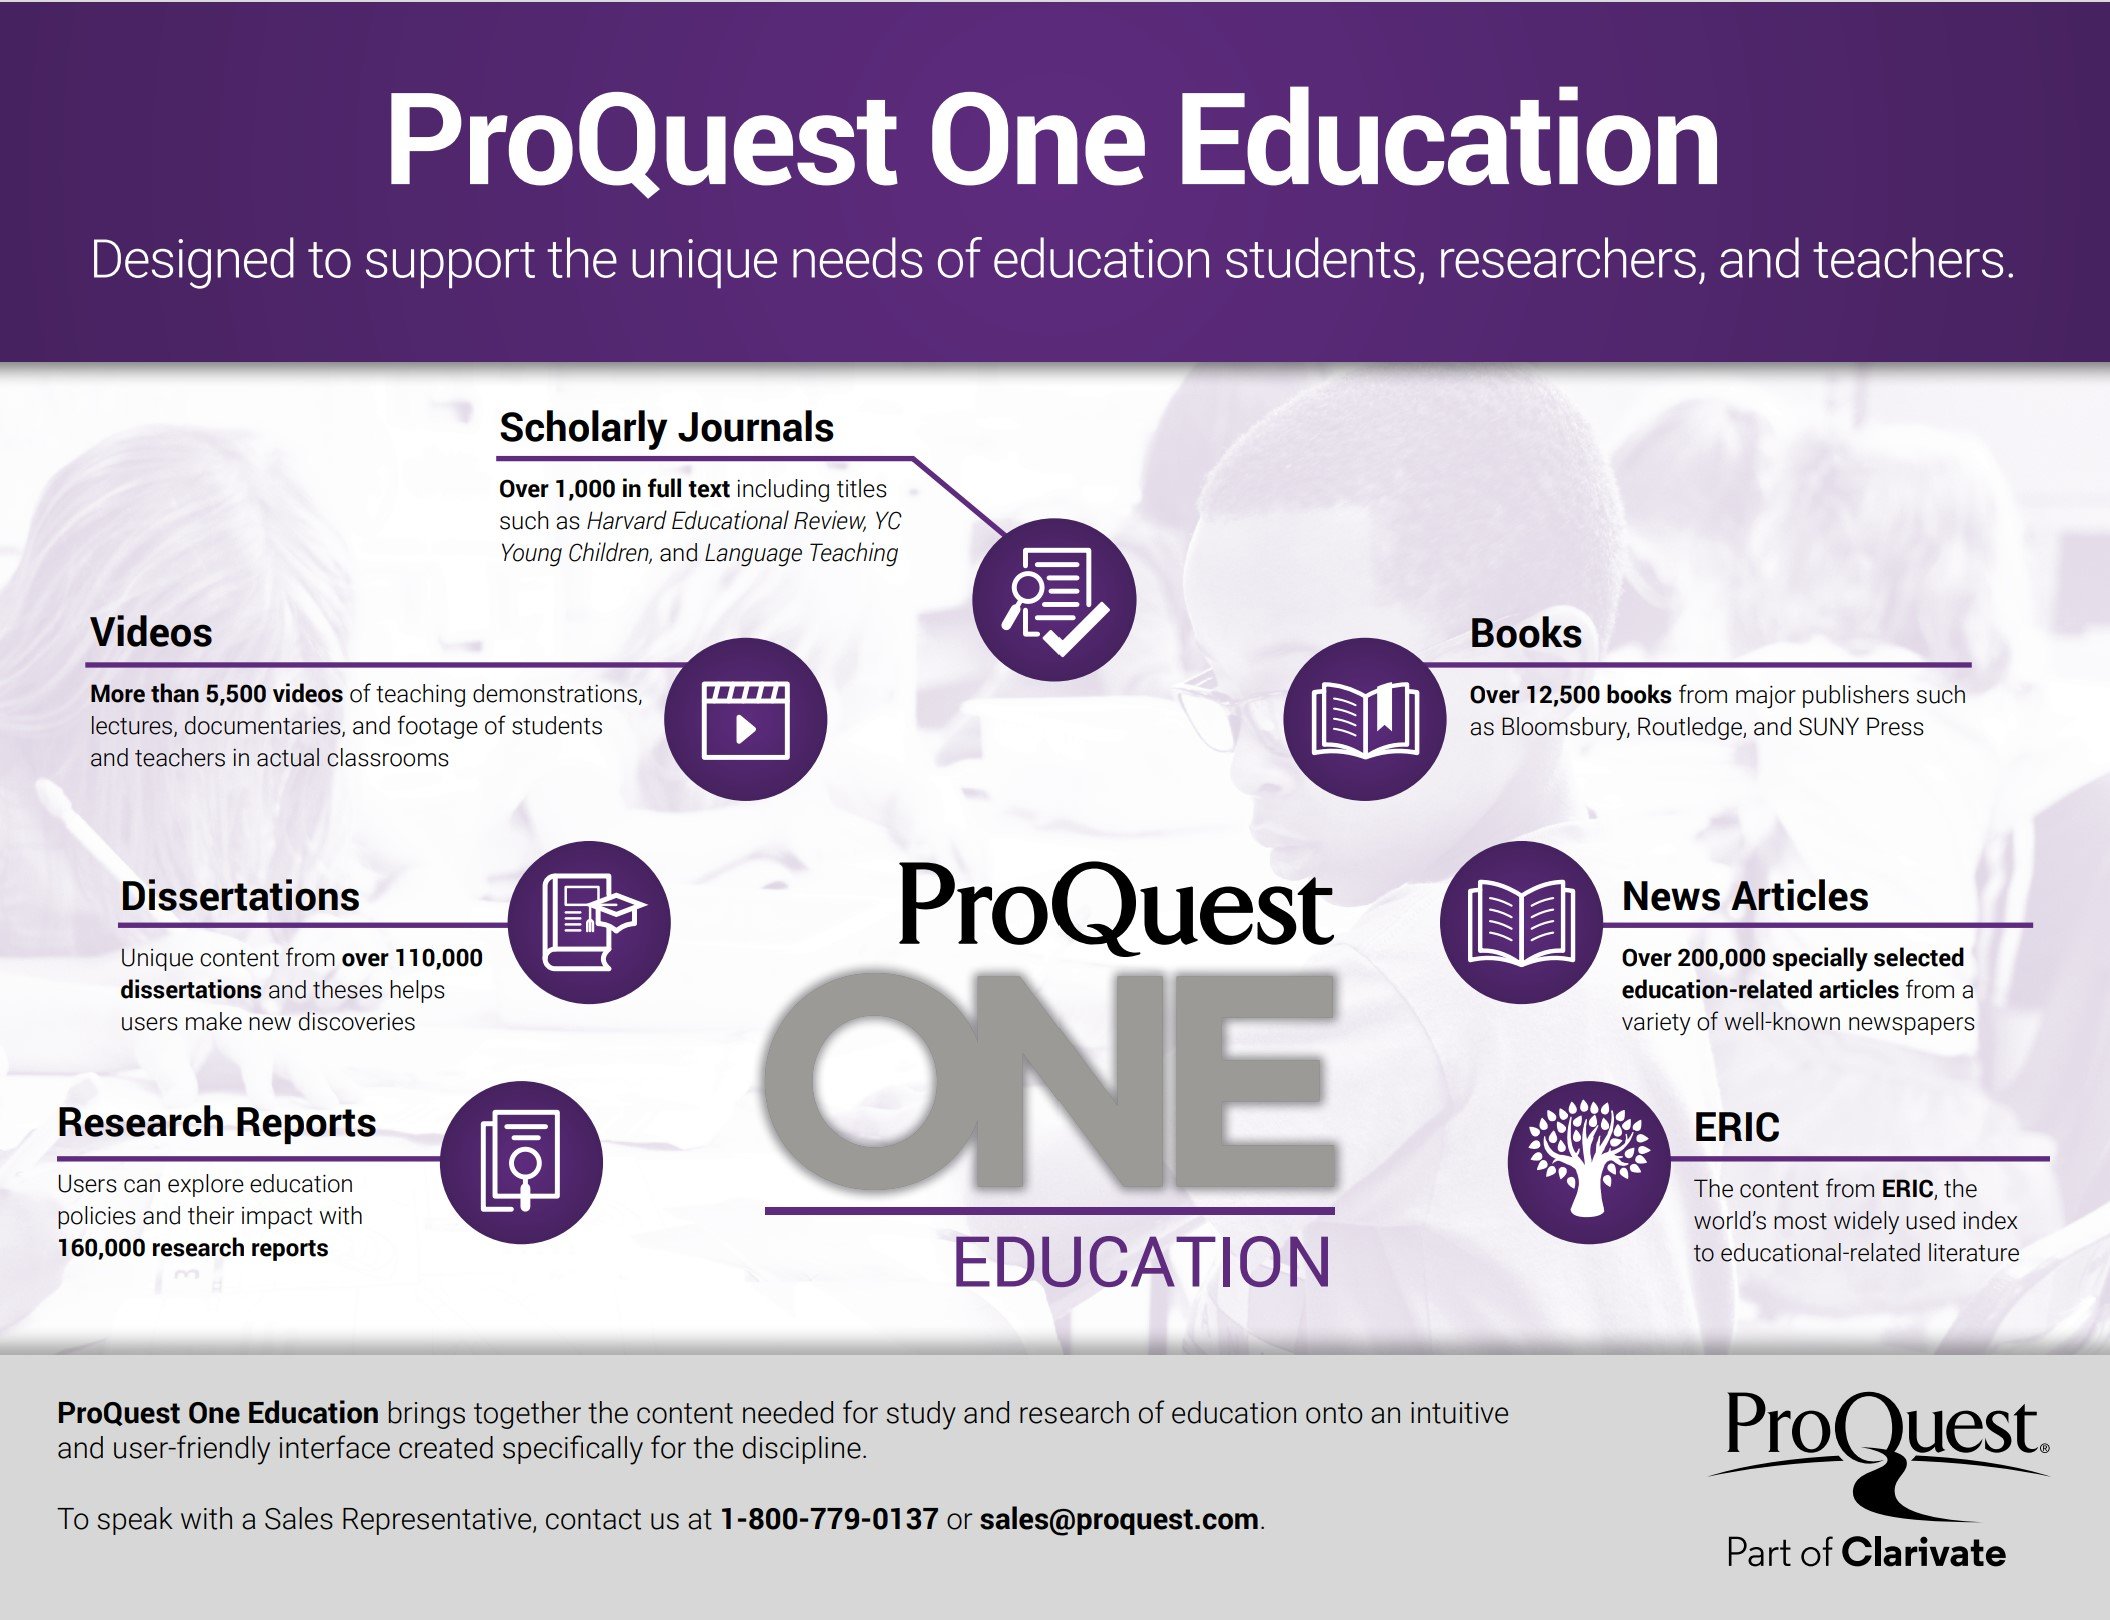 See What’s In ProQuest One Education